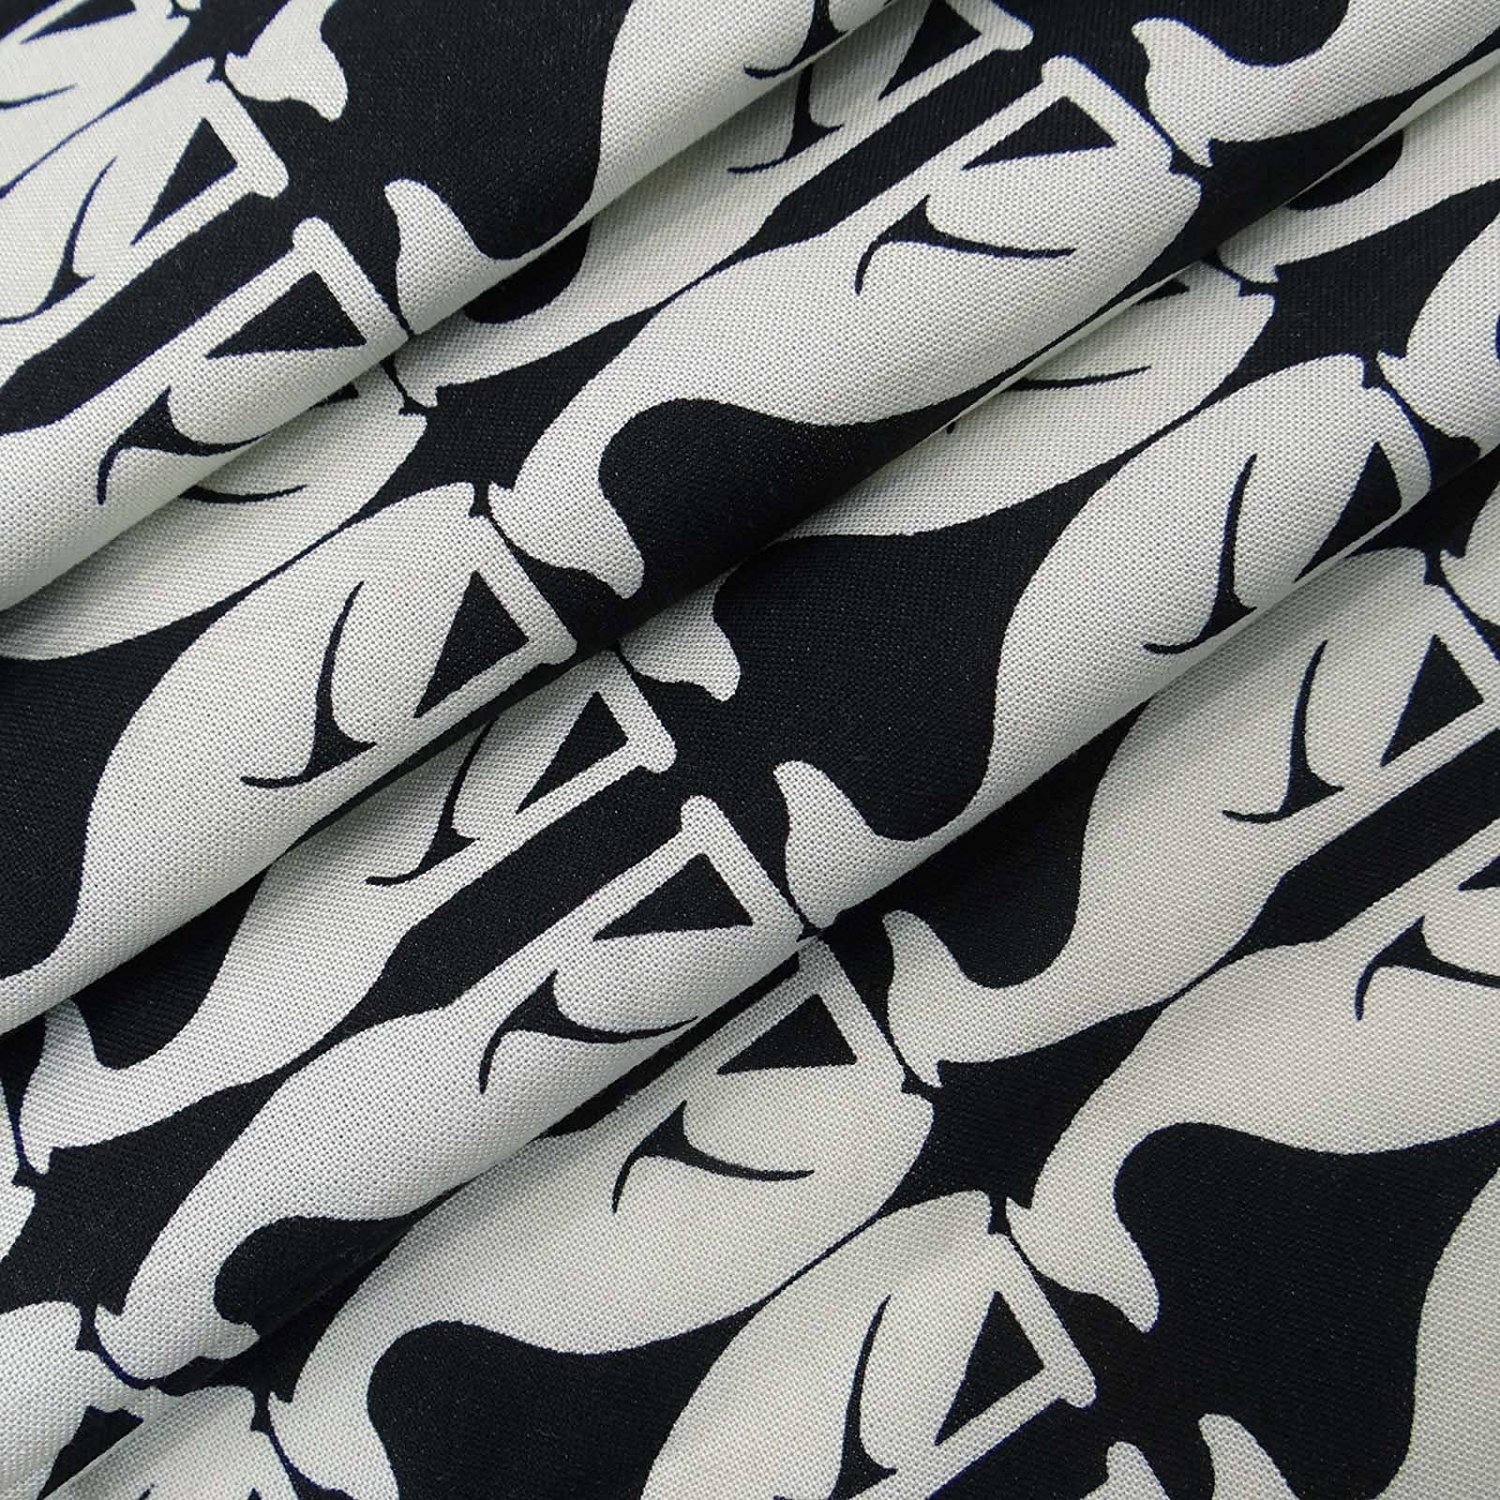 Dog Printed Fabric Black Fabric Dress Material Sewing | Etsy